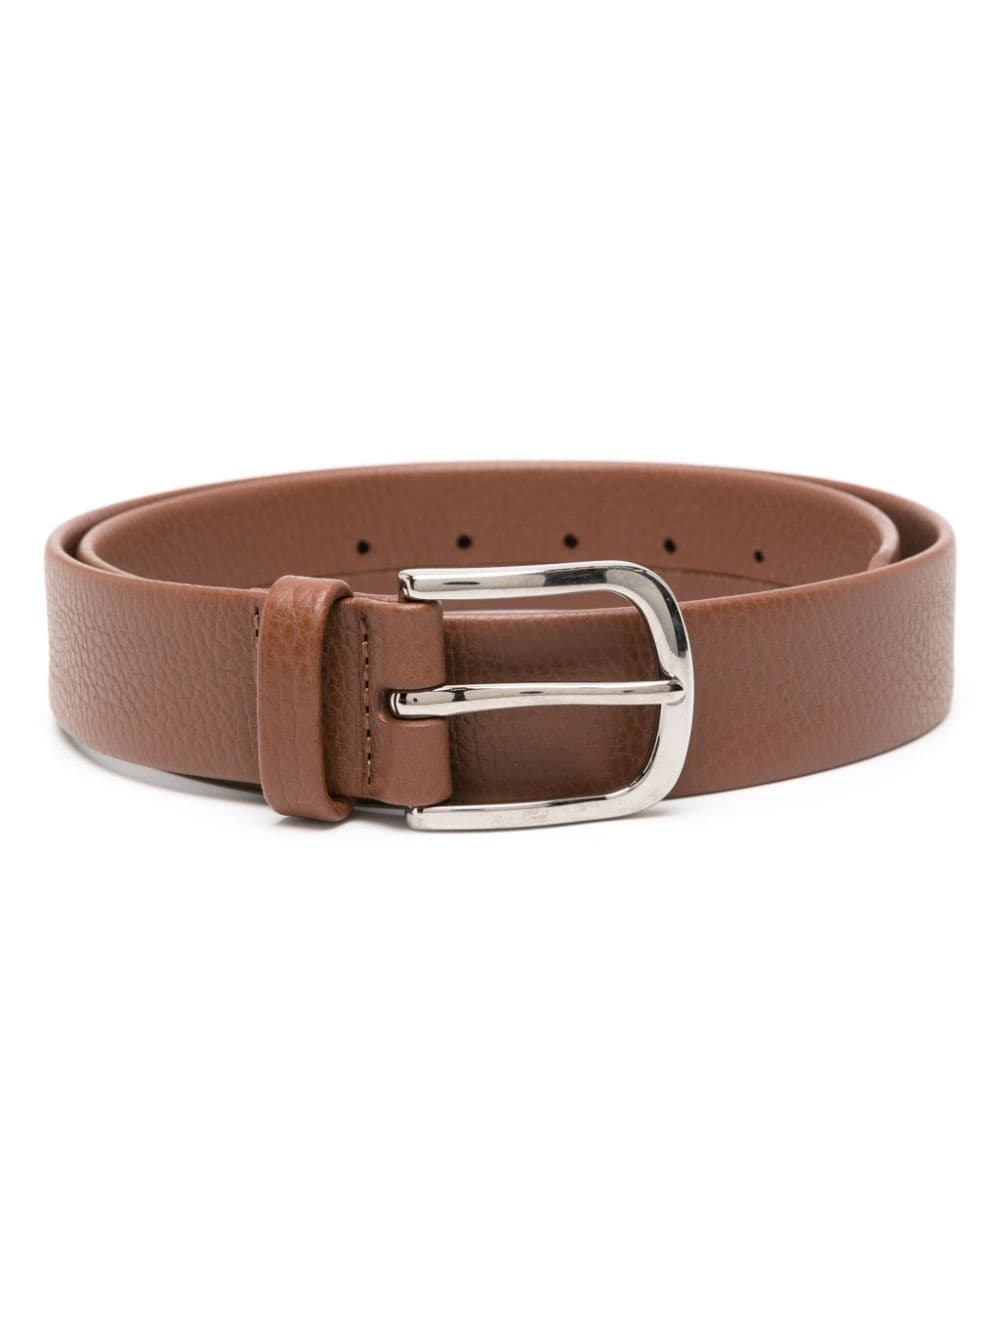 Orciani Dollaro leather belt - Brown von Orciani